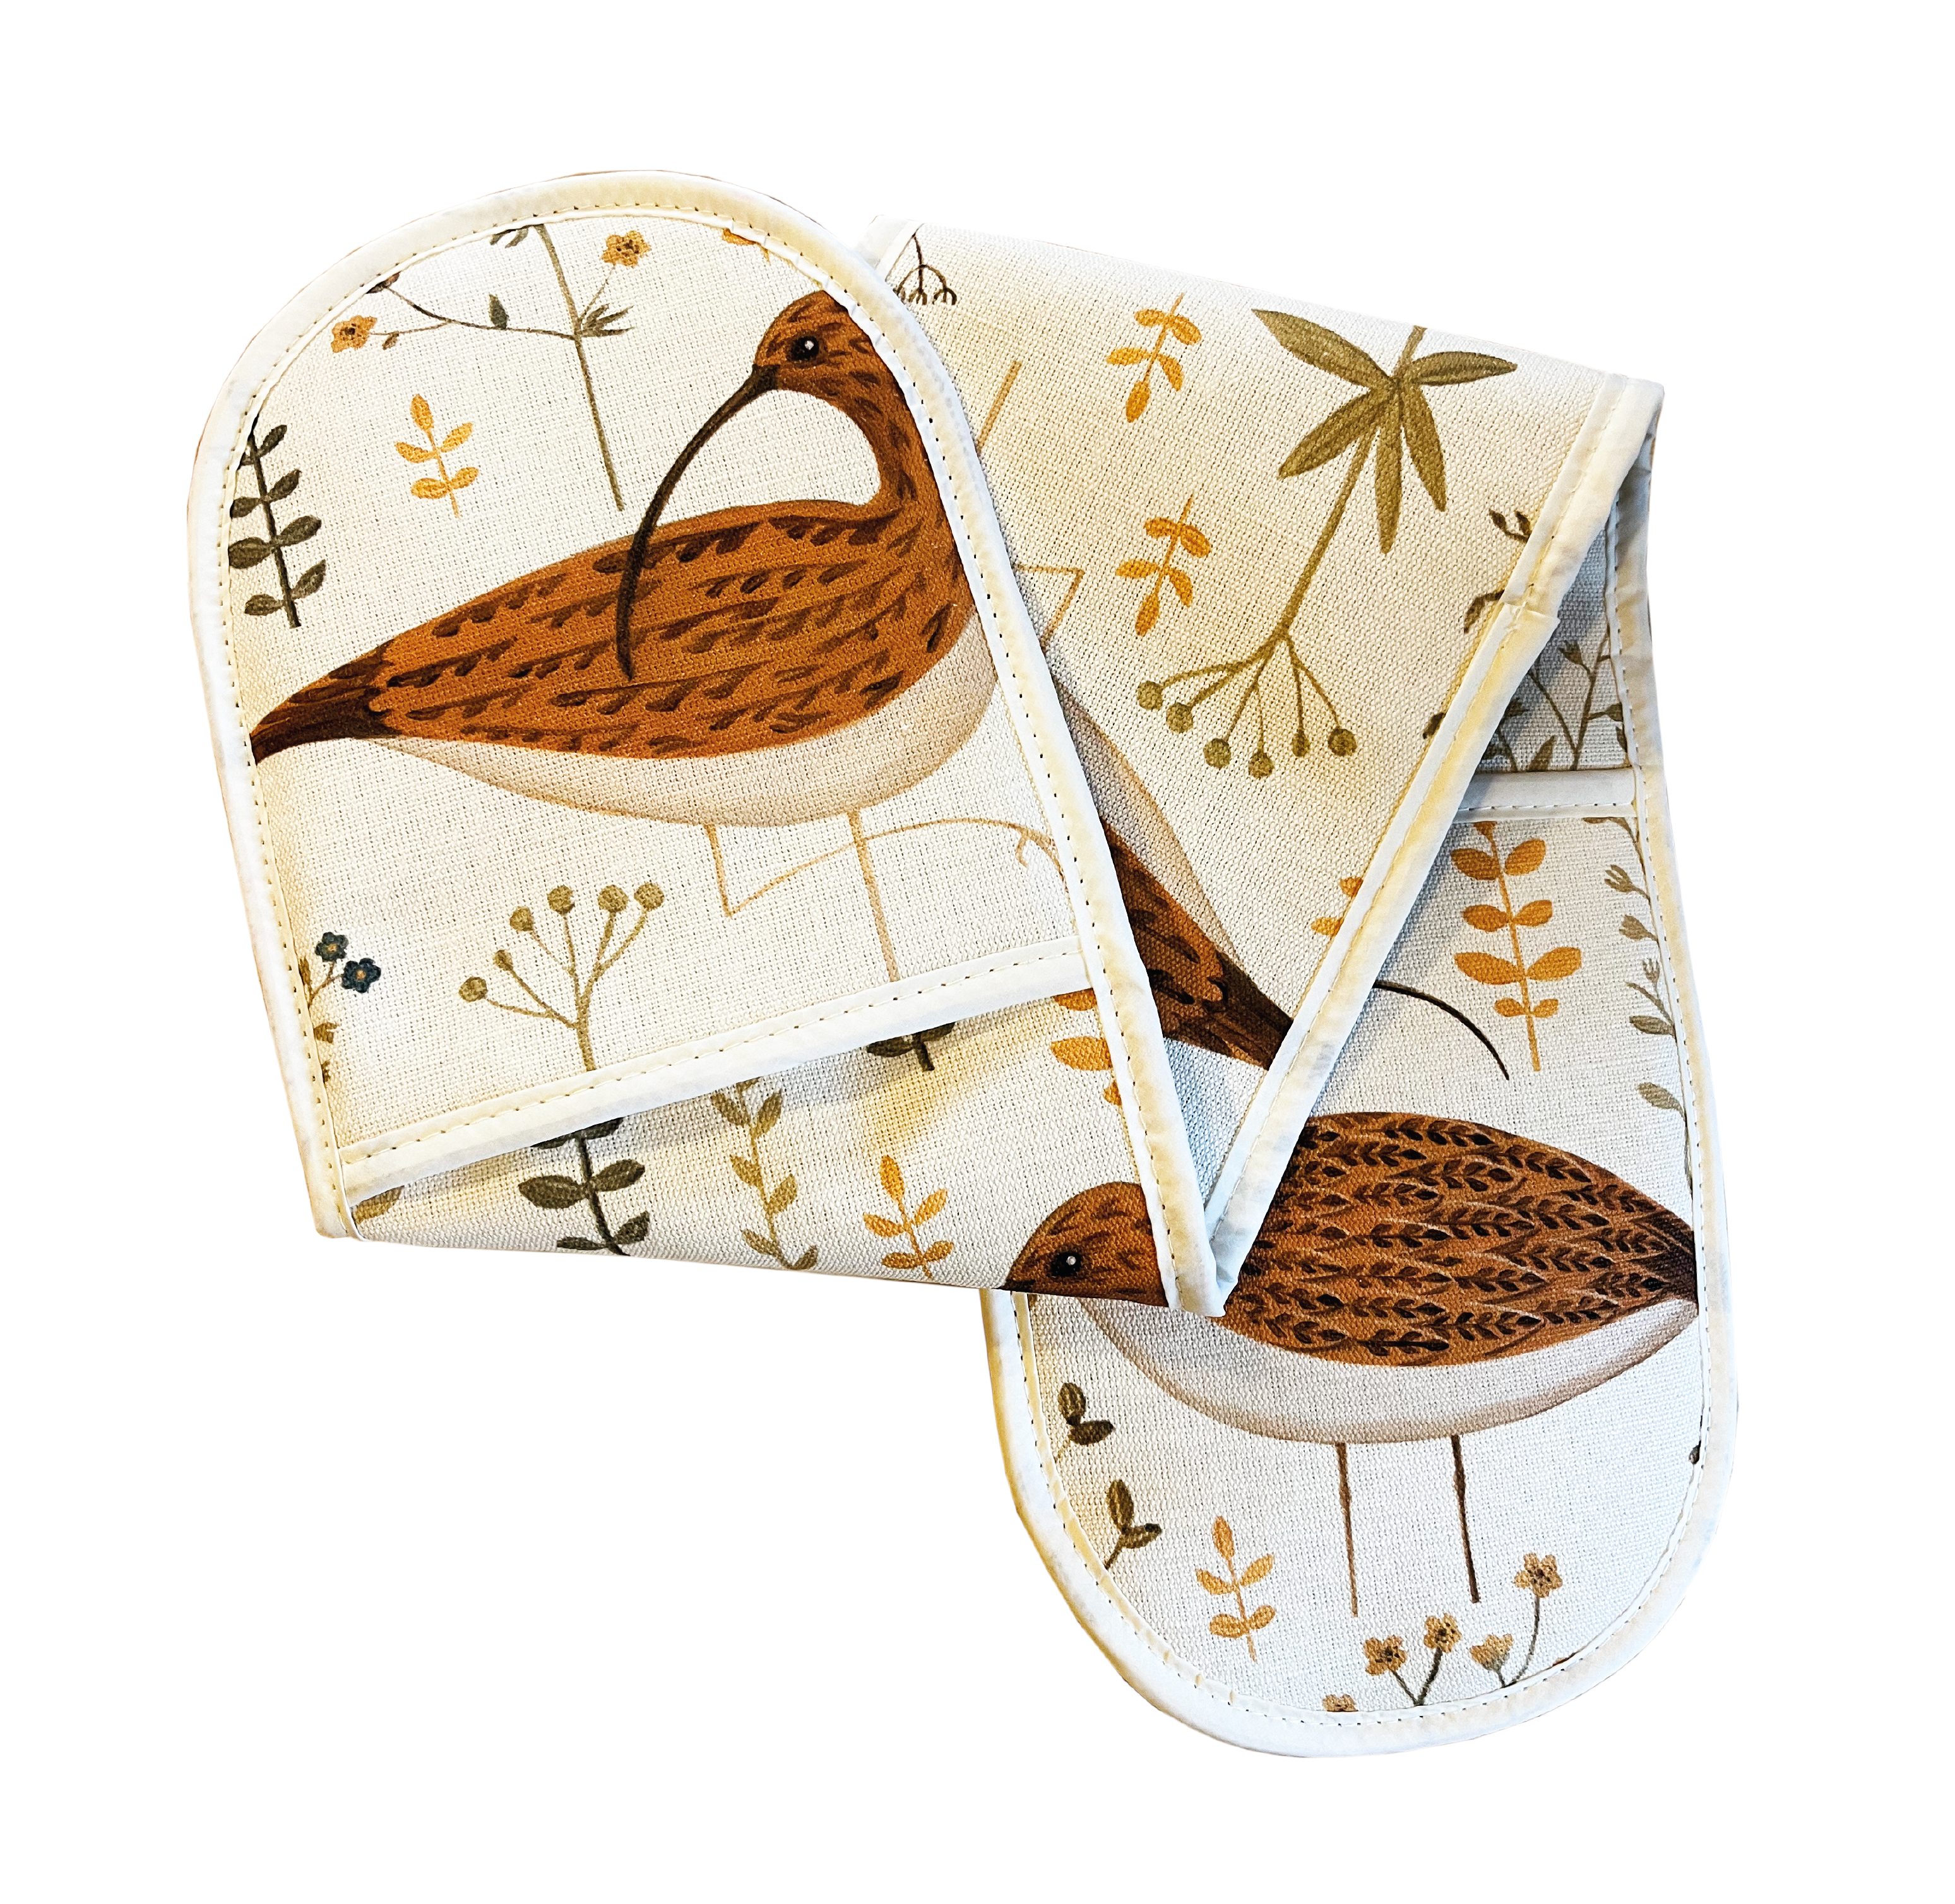 https://res.cloudinary.com/wolfandbadger/image/upload/s--2cRQOZnS--/q_auto:eco/products/limited-edition-curlew-double-oven-gloves__c34394ea273a9d2b6d48ef4fb2bddedb